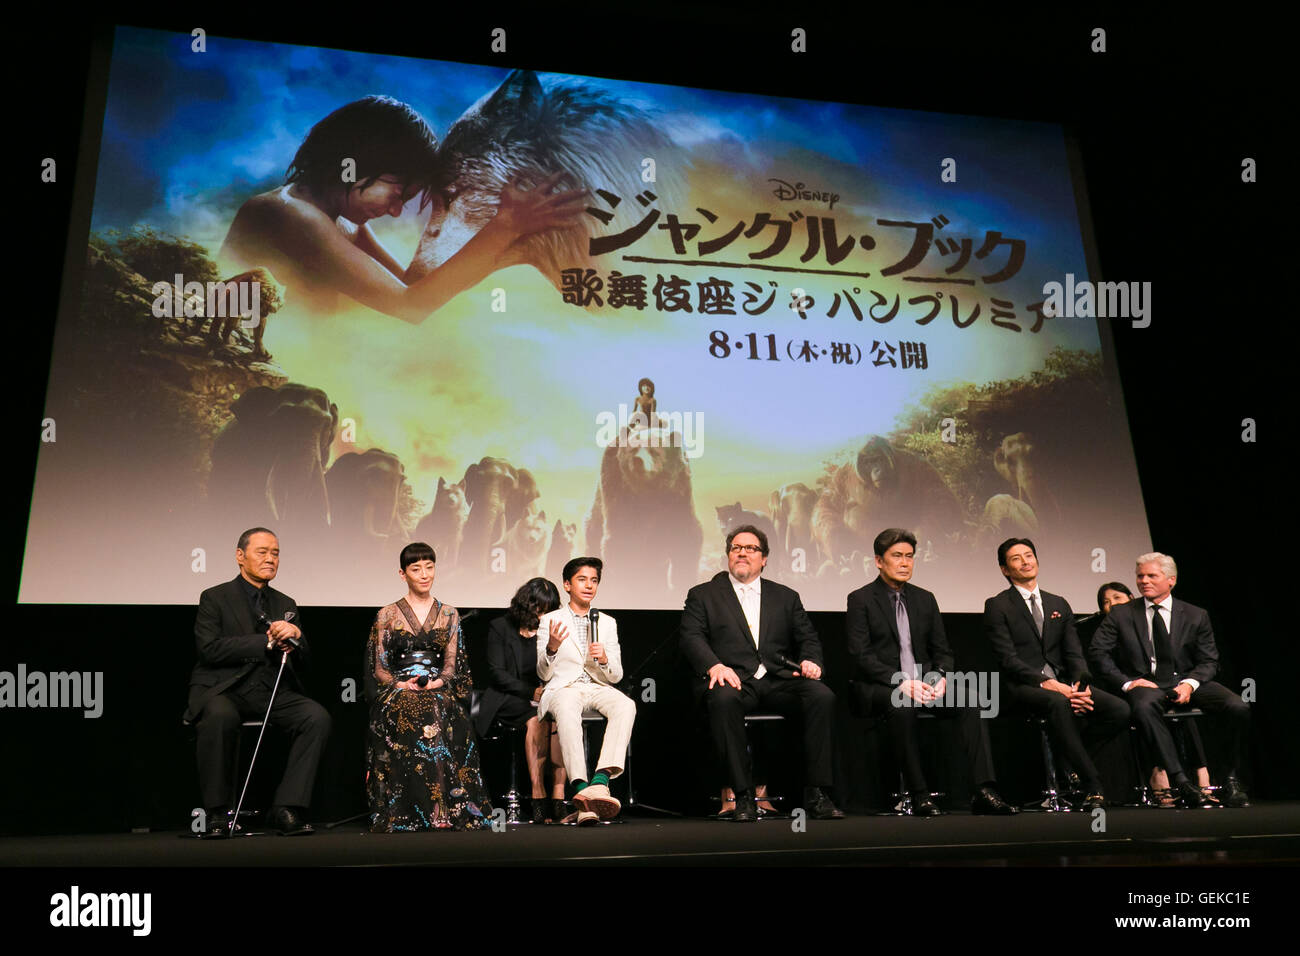 Tokyo, Japan. 27th July, 2016.  (L to R) Actor Toshiyuki Nishida, actress Rie Miyazawa, child actor Neel Sethi, director Jon Favreau, actor Matsumoto Koshiro, actor Yusuke Iseya and producer Brigham Taylor speak during the Japanese premiere for the film The Jungle Book at Kabuki-za theater in Ginza on July 27, 2016, Tokyo, Japan. Sethi, Taylor and Japanese voice cast appeared on the stage to greet the fans. The movie will be released in Japan on August 11. Credit:  Rodrigo Reyes Marin/AFLO/Alamy Live News Stock Photo